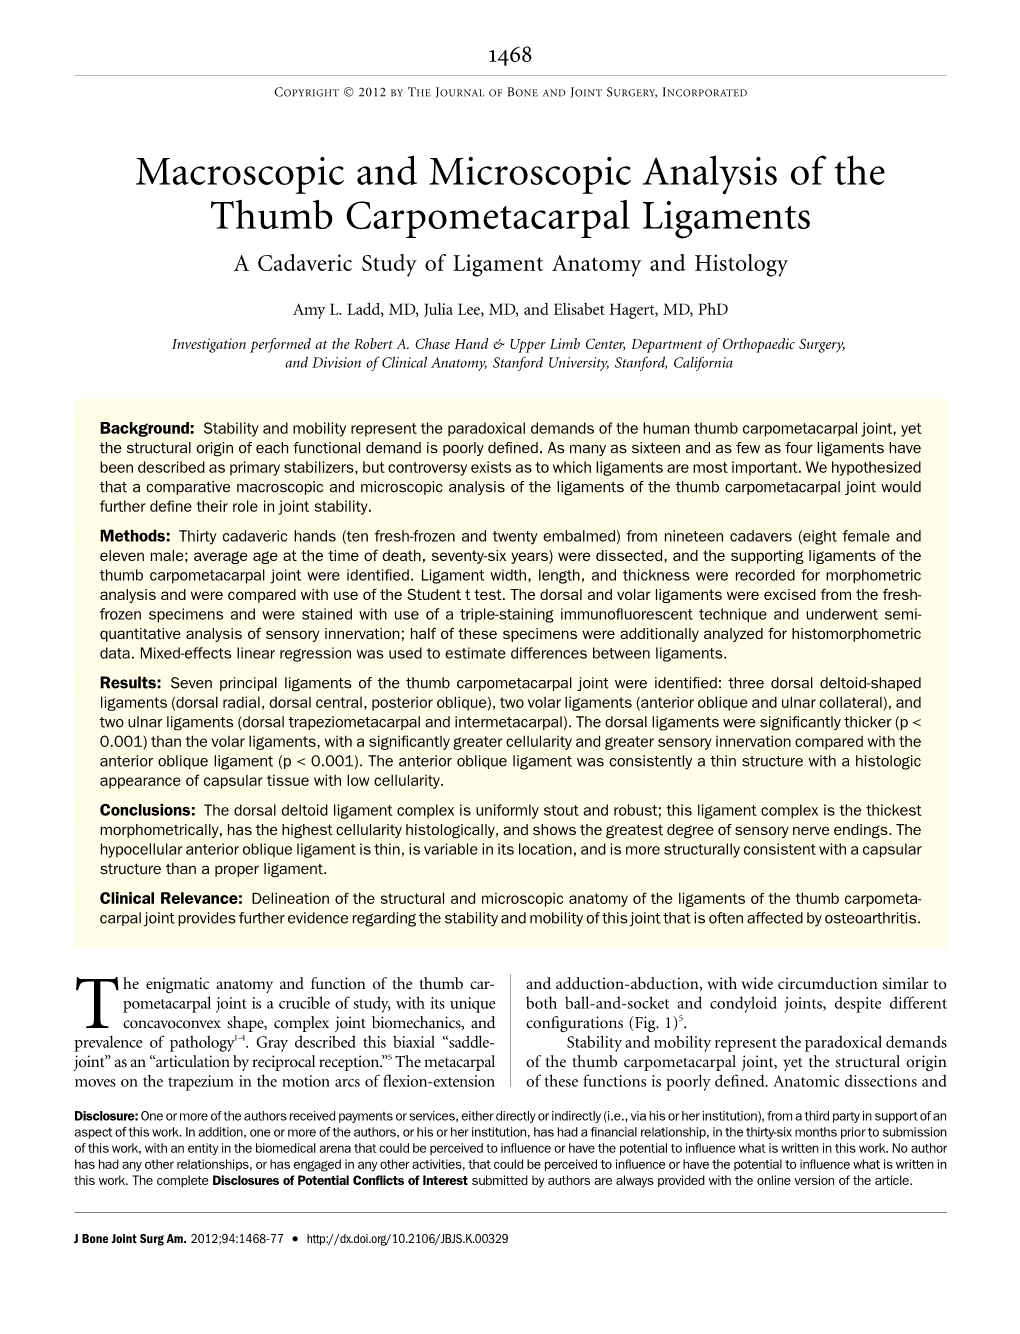 Macroscopic and Microscopic Analysis of the Thumb Carpometacarpal Ligaments a Cadaveric Study of Ligament Anatomy and Histology